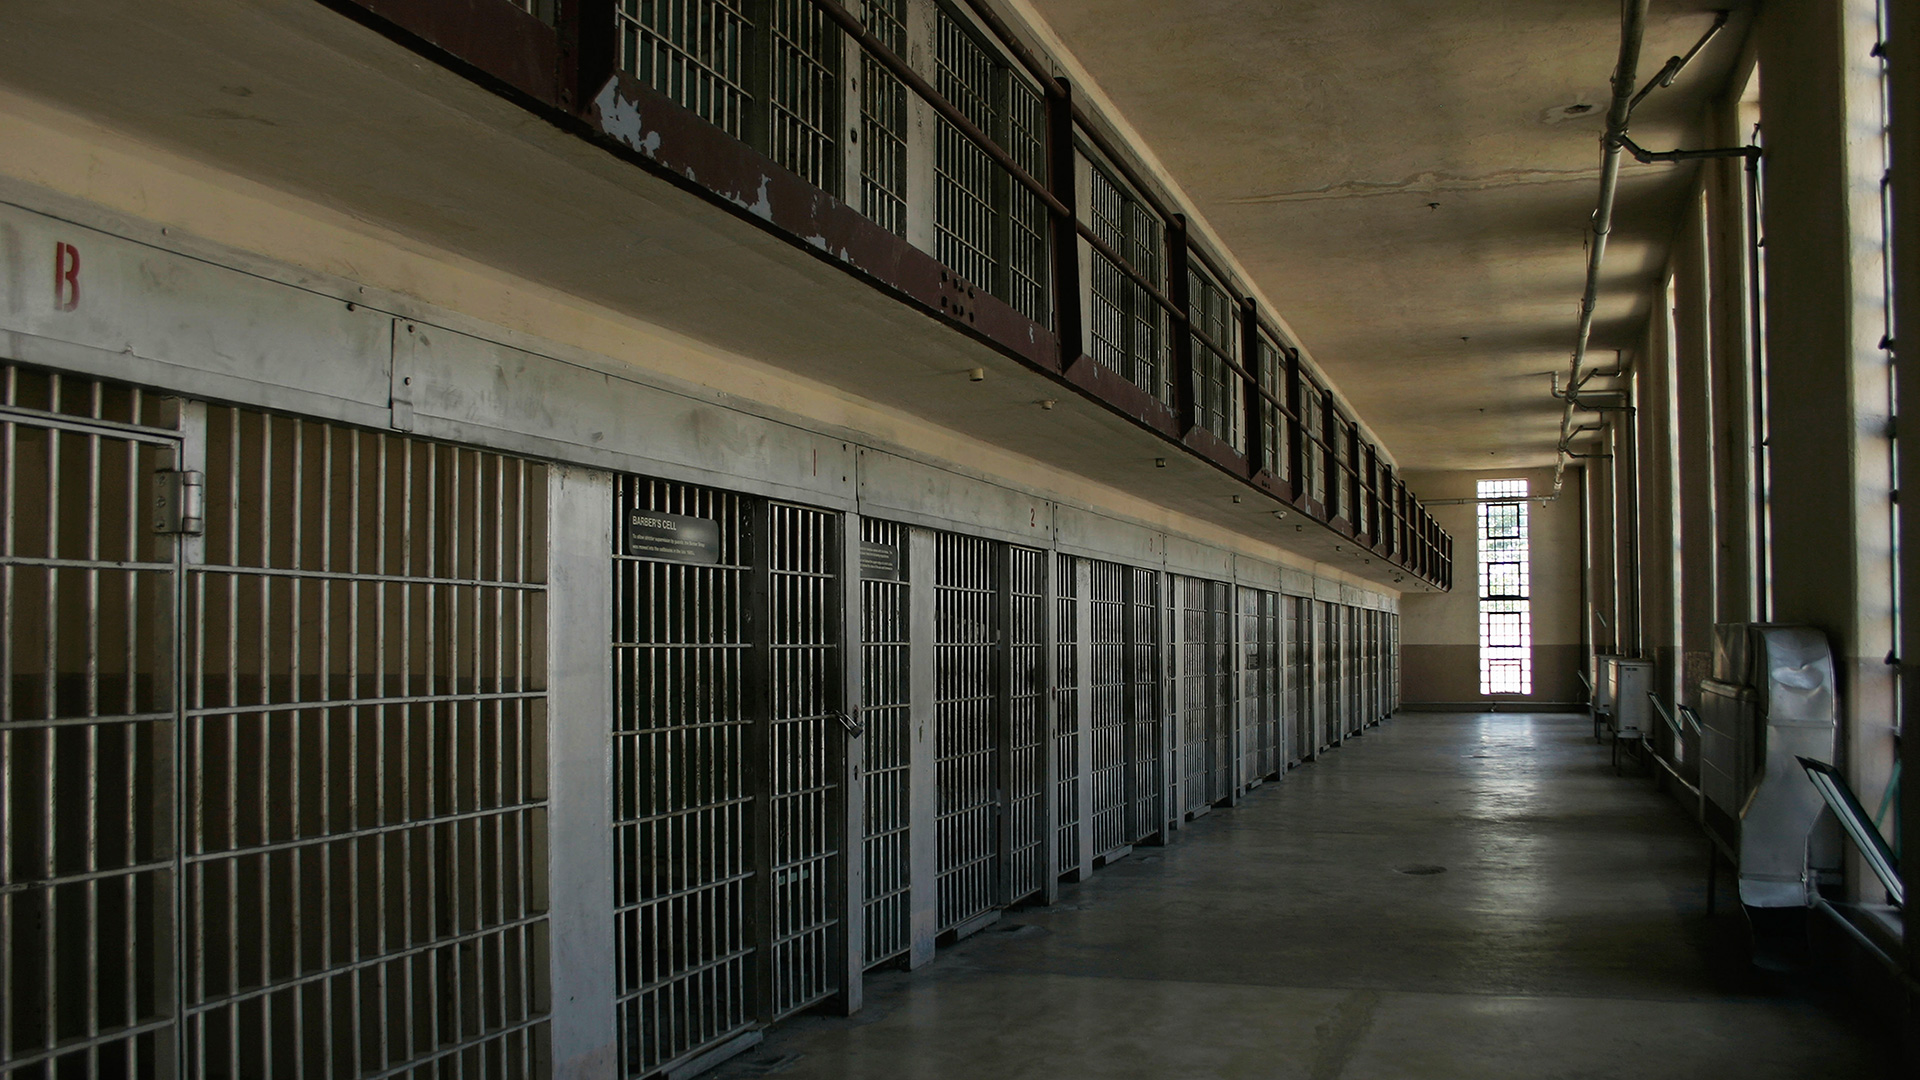 A cell block at the Old Idaho State Penitentiary in Boise, Idaho.